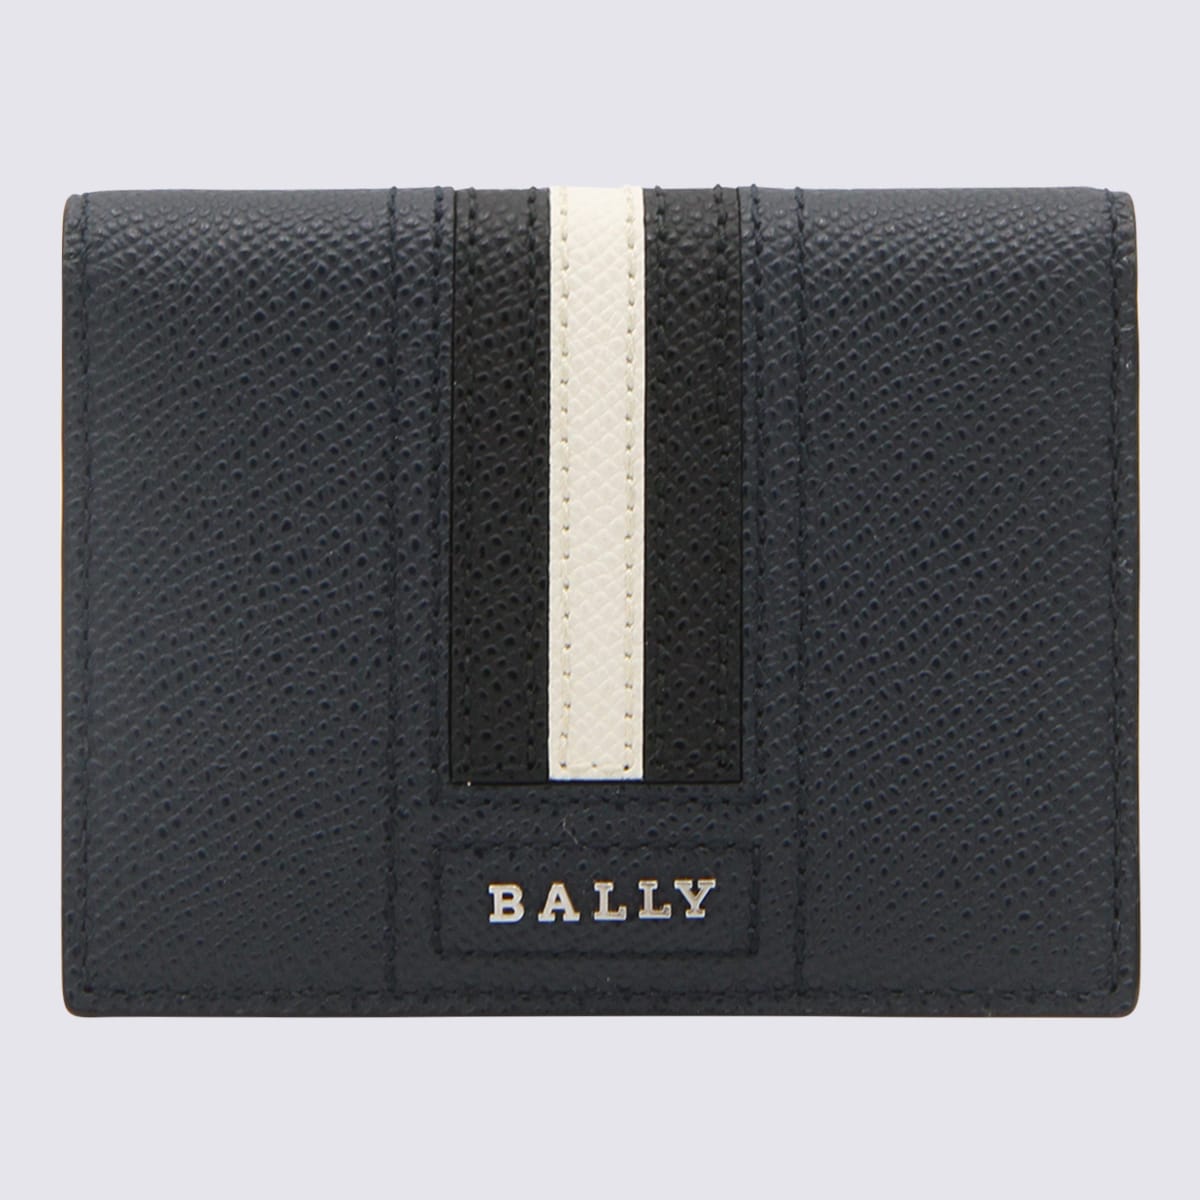 Bally Navy Blue, White And Black Leather Wallet